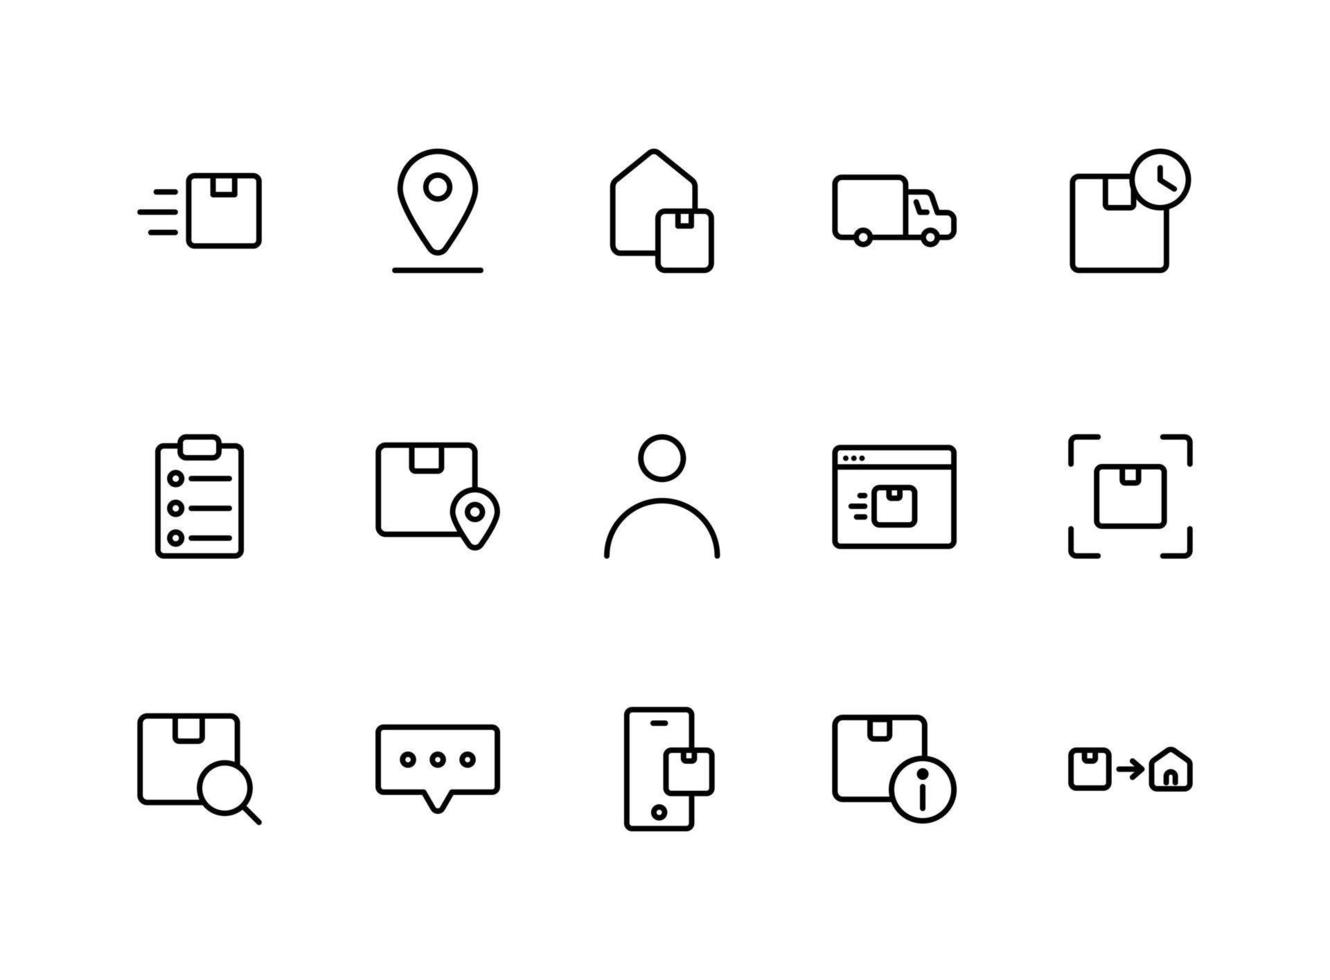 Delivery service icon set. Vector illustration.